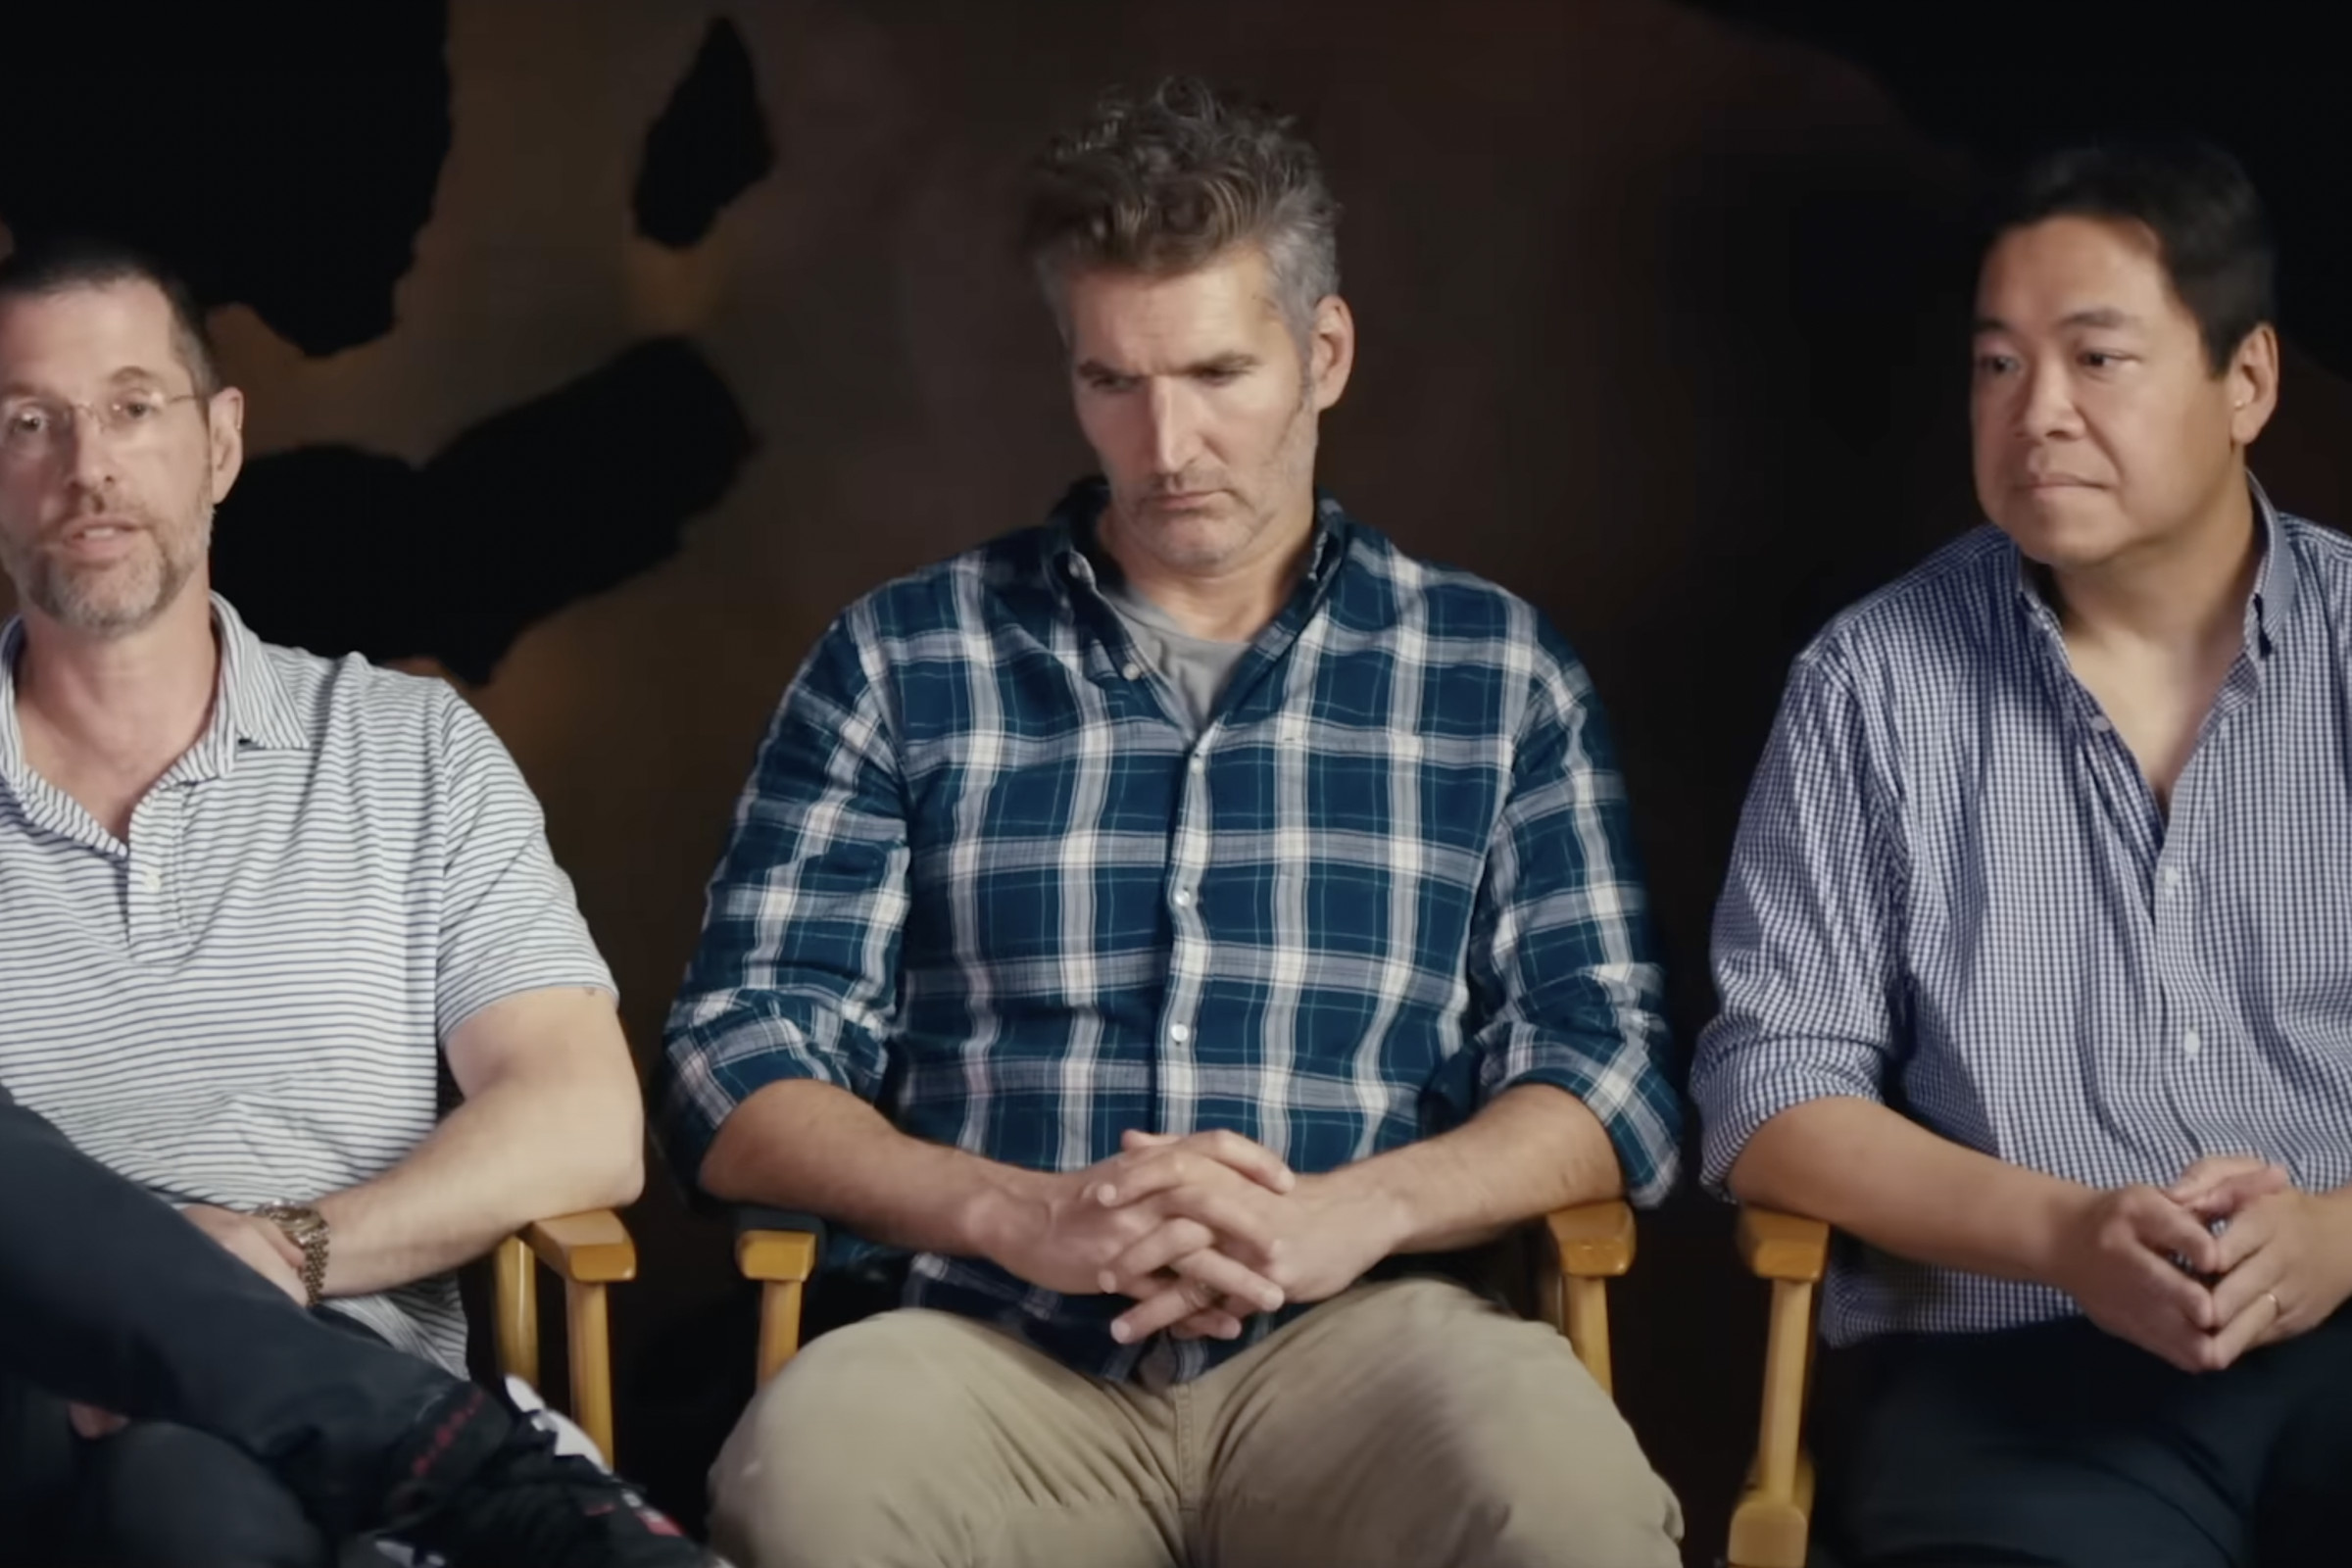 3 Body Problem executive producers D.B. Weiss, David Benioff, and Alexander Woo sitting together in chairs for a promotional video about the upcoming series.